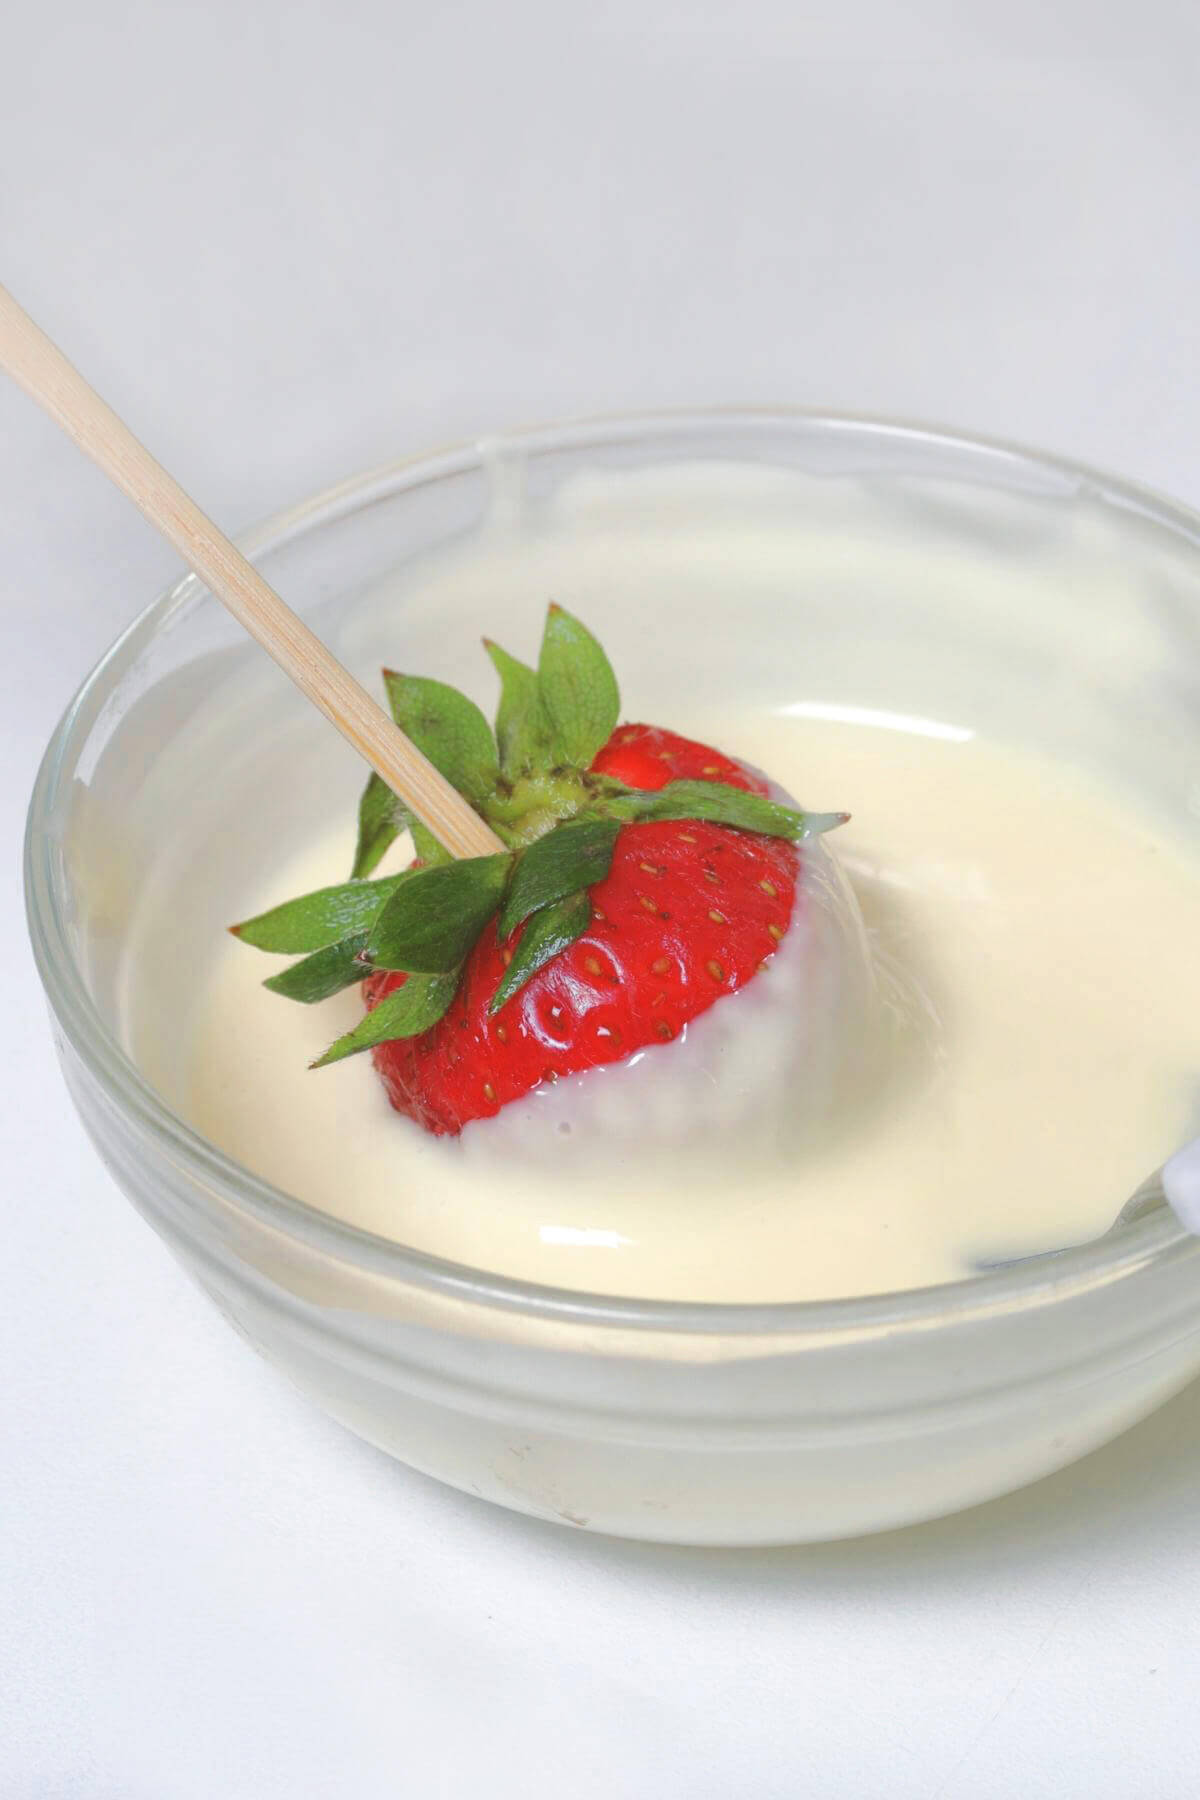 A strawberry with a skewer in it dipping into a small bowl of melted white chocolate